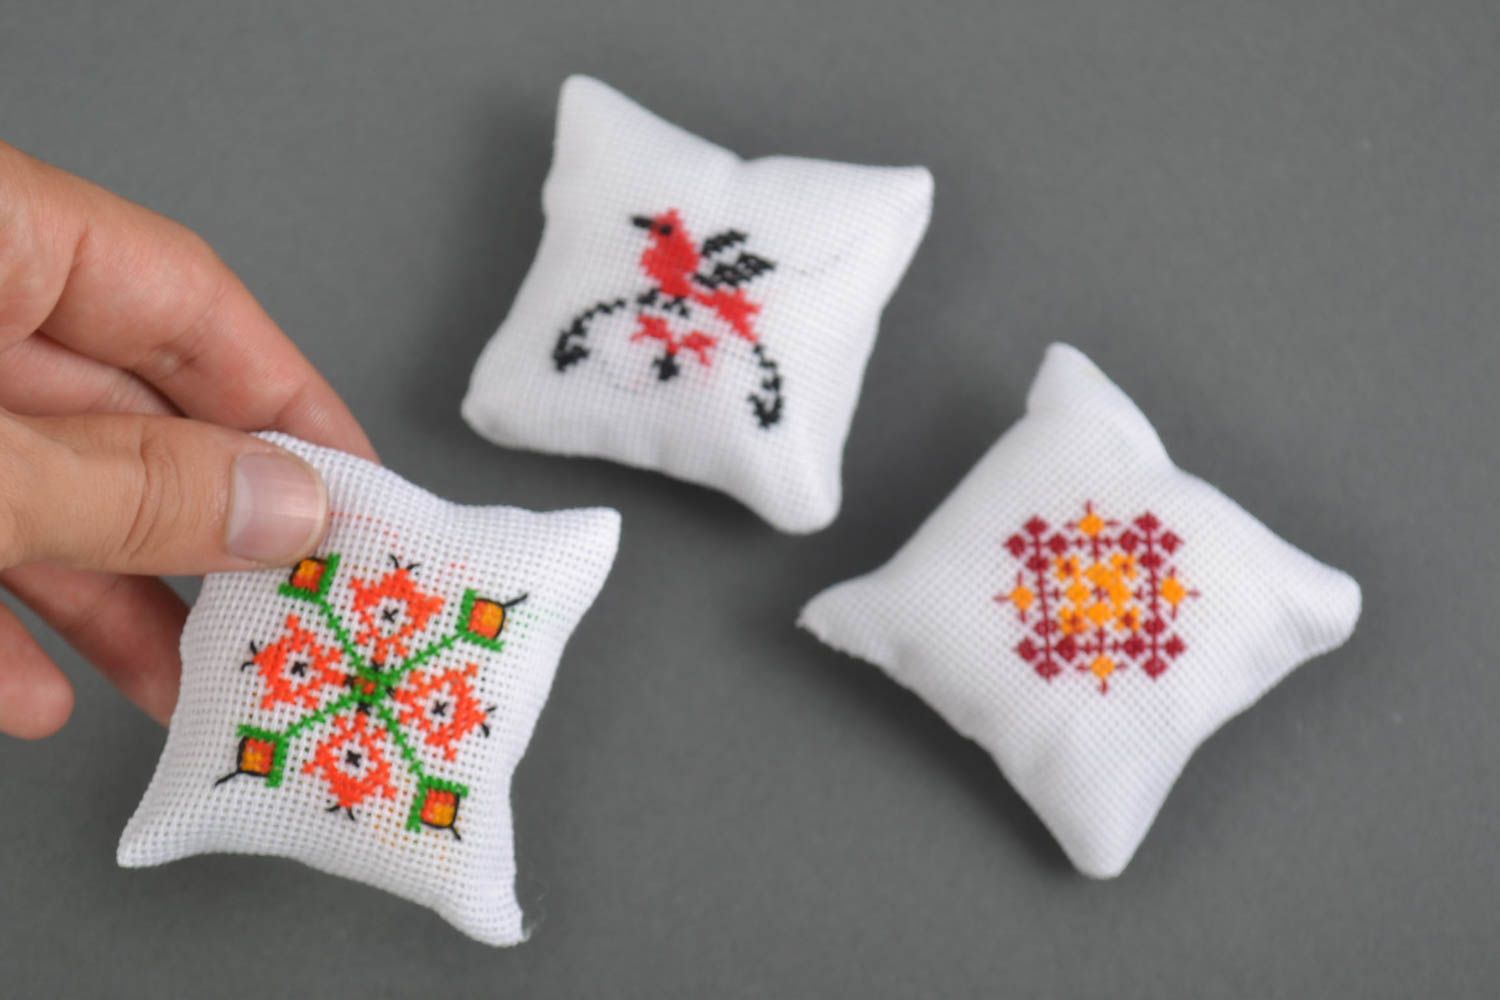 Handmade pin cushions sewing accessories 3 needle holders embroidery supplies photo 2